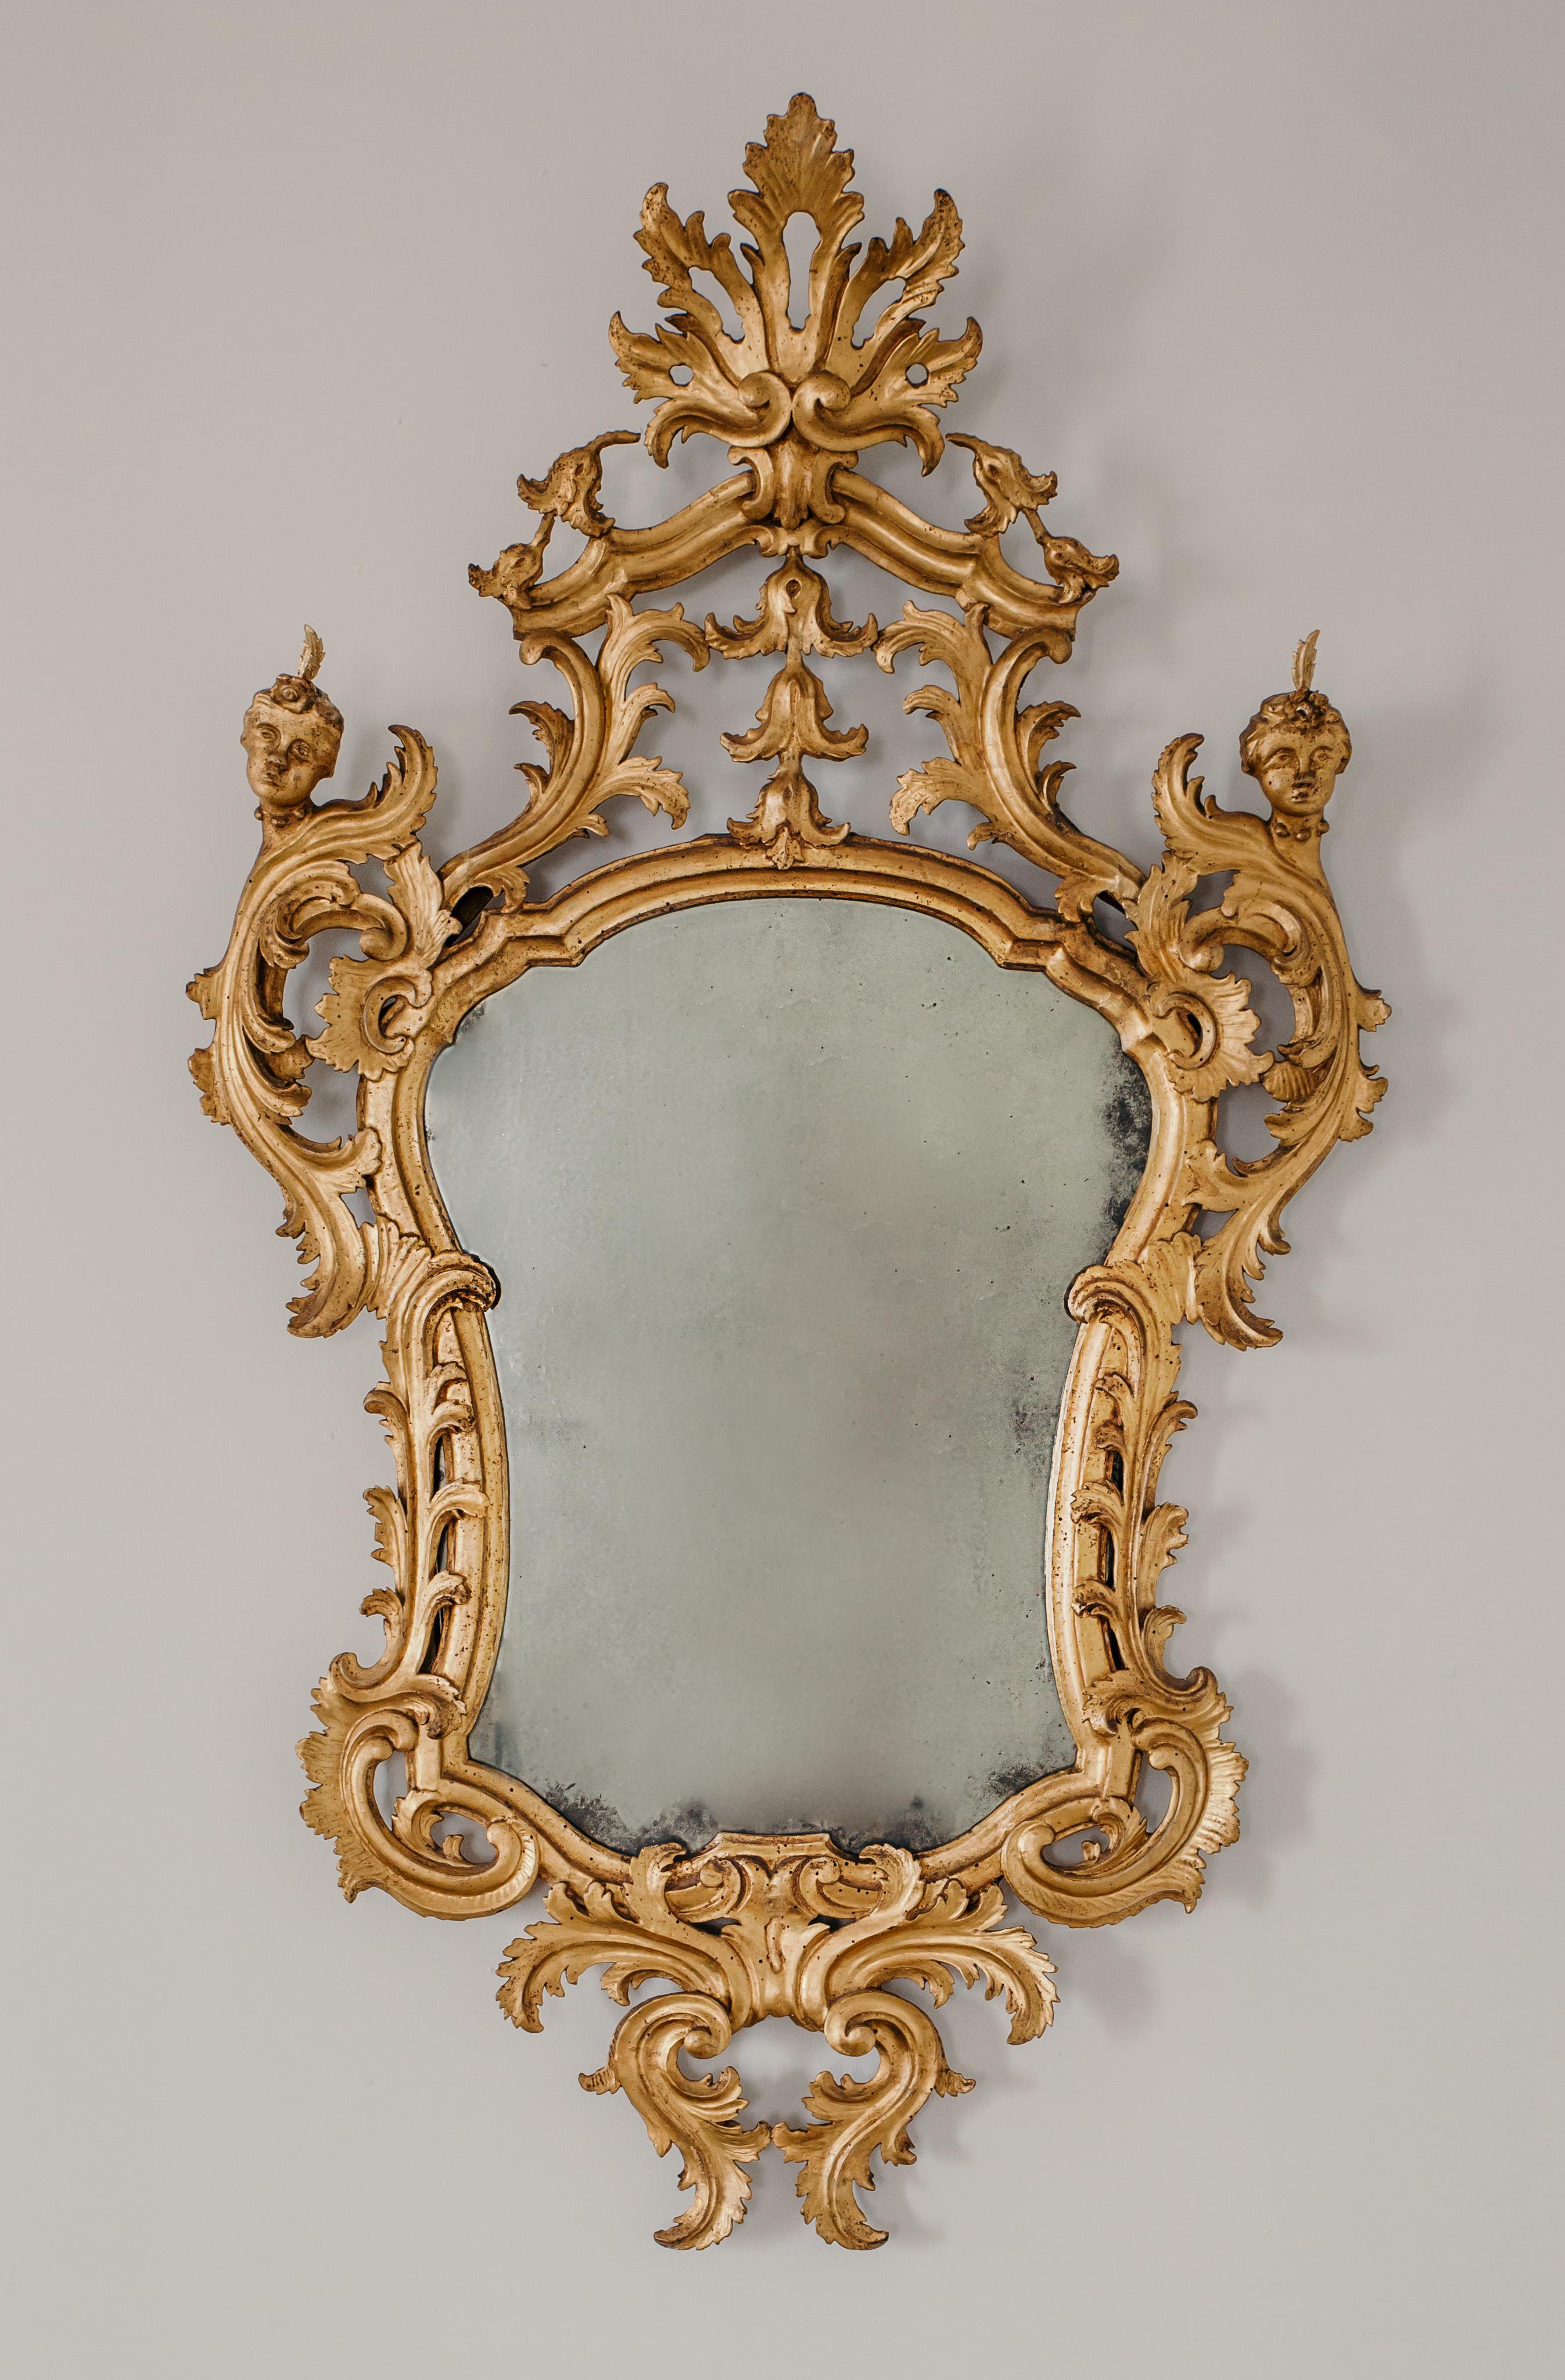 This beautiful pair of gilded mirrors was made in 18th century in Italy.
They have a gilded wooden frame carved with foliate motifs with a rich cymatium at the top. On the upper sides we find the presence of a rare pair of sculpted heads. A